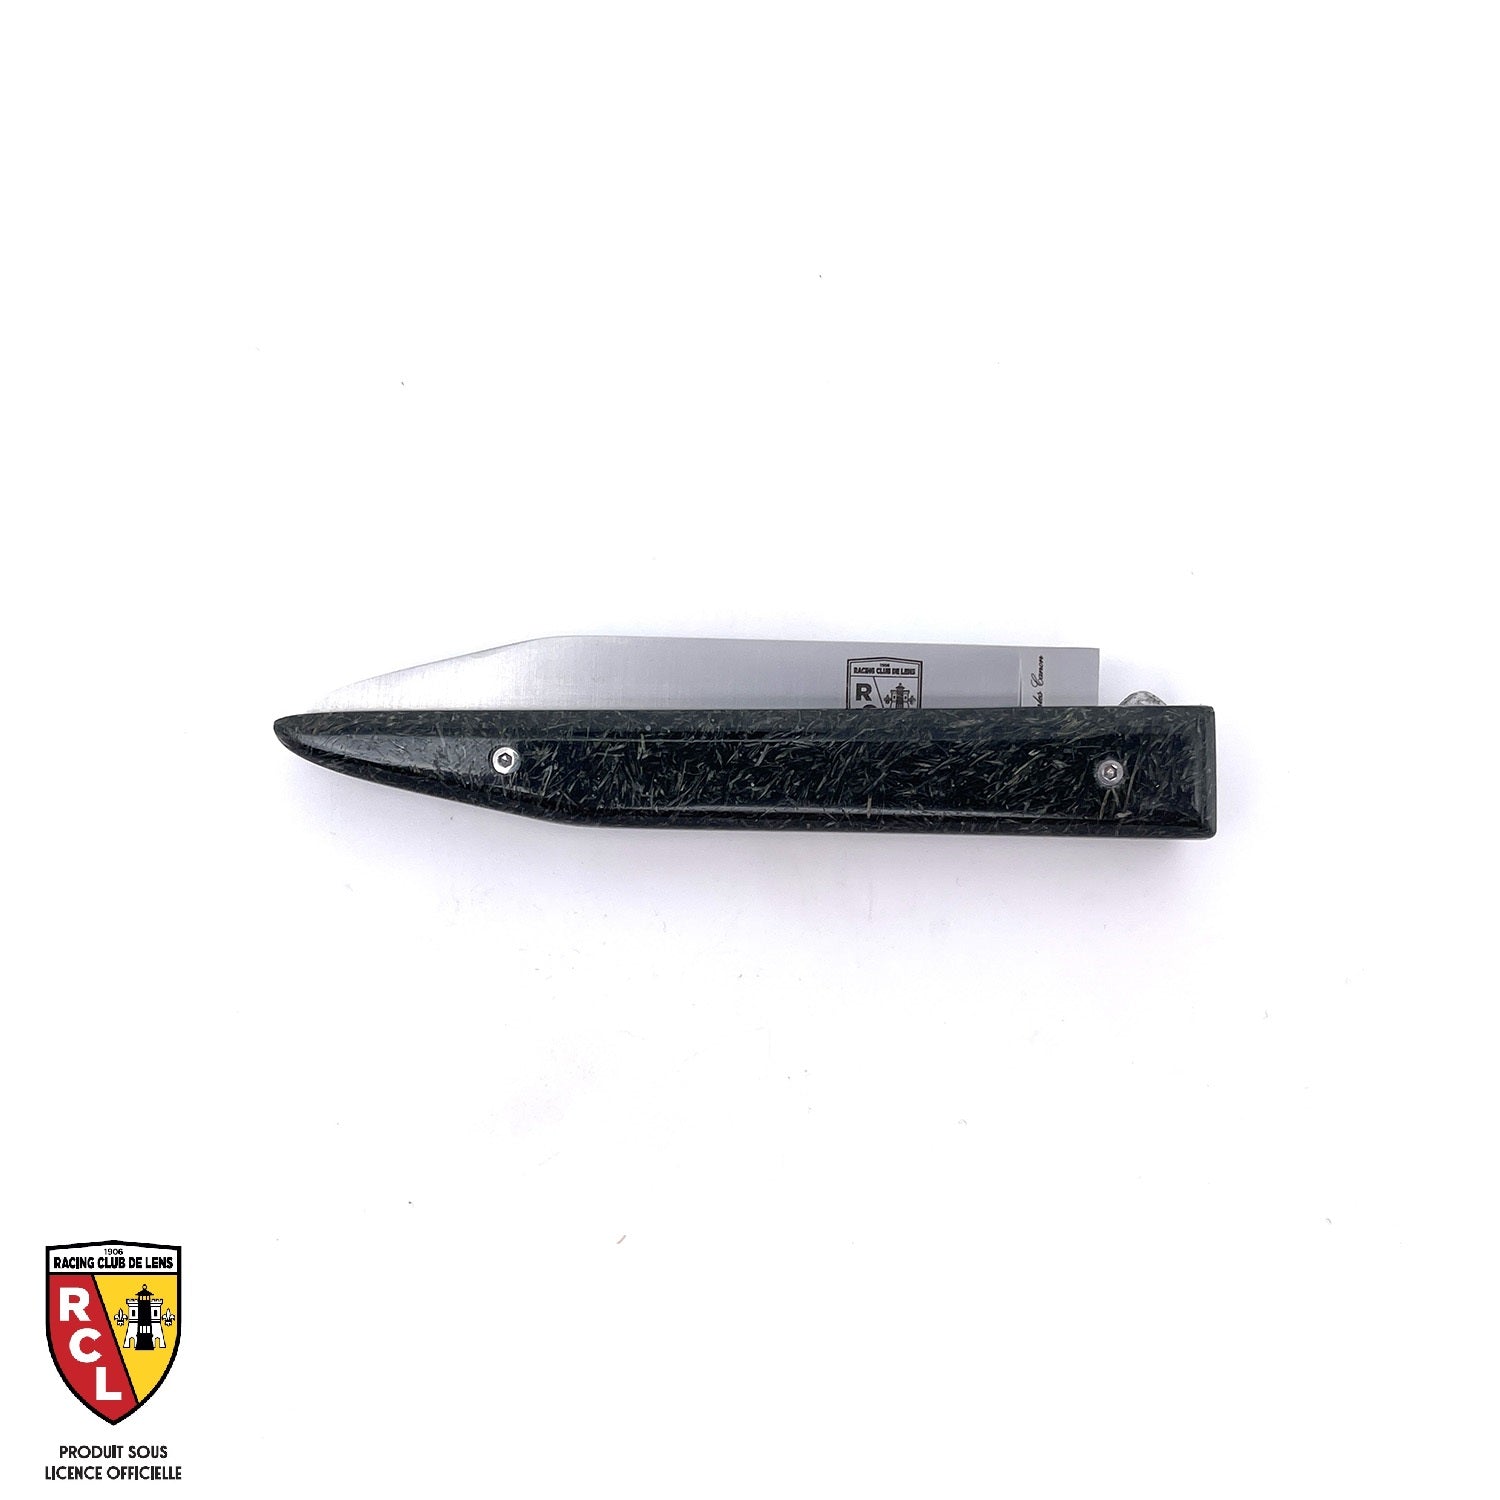 RC LENS folding knife with its grass handle from the Bollaert-Delelis stadium 2023-2024 (UNDER OFFICIAL LICENSE)